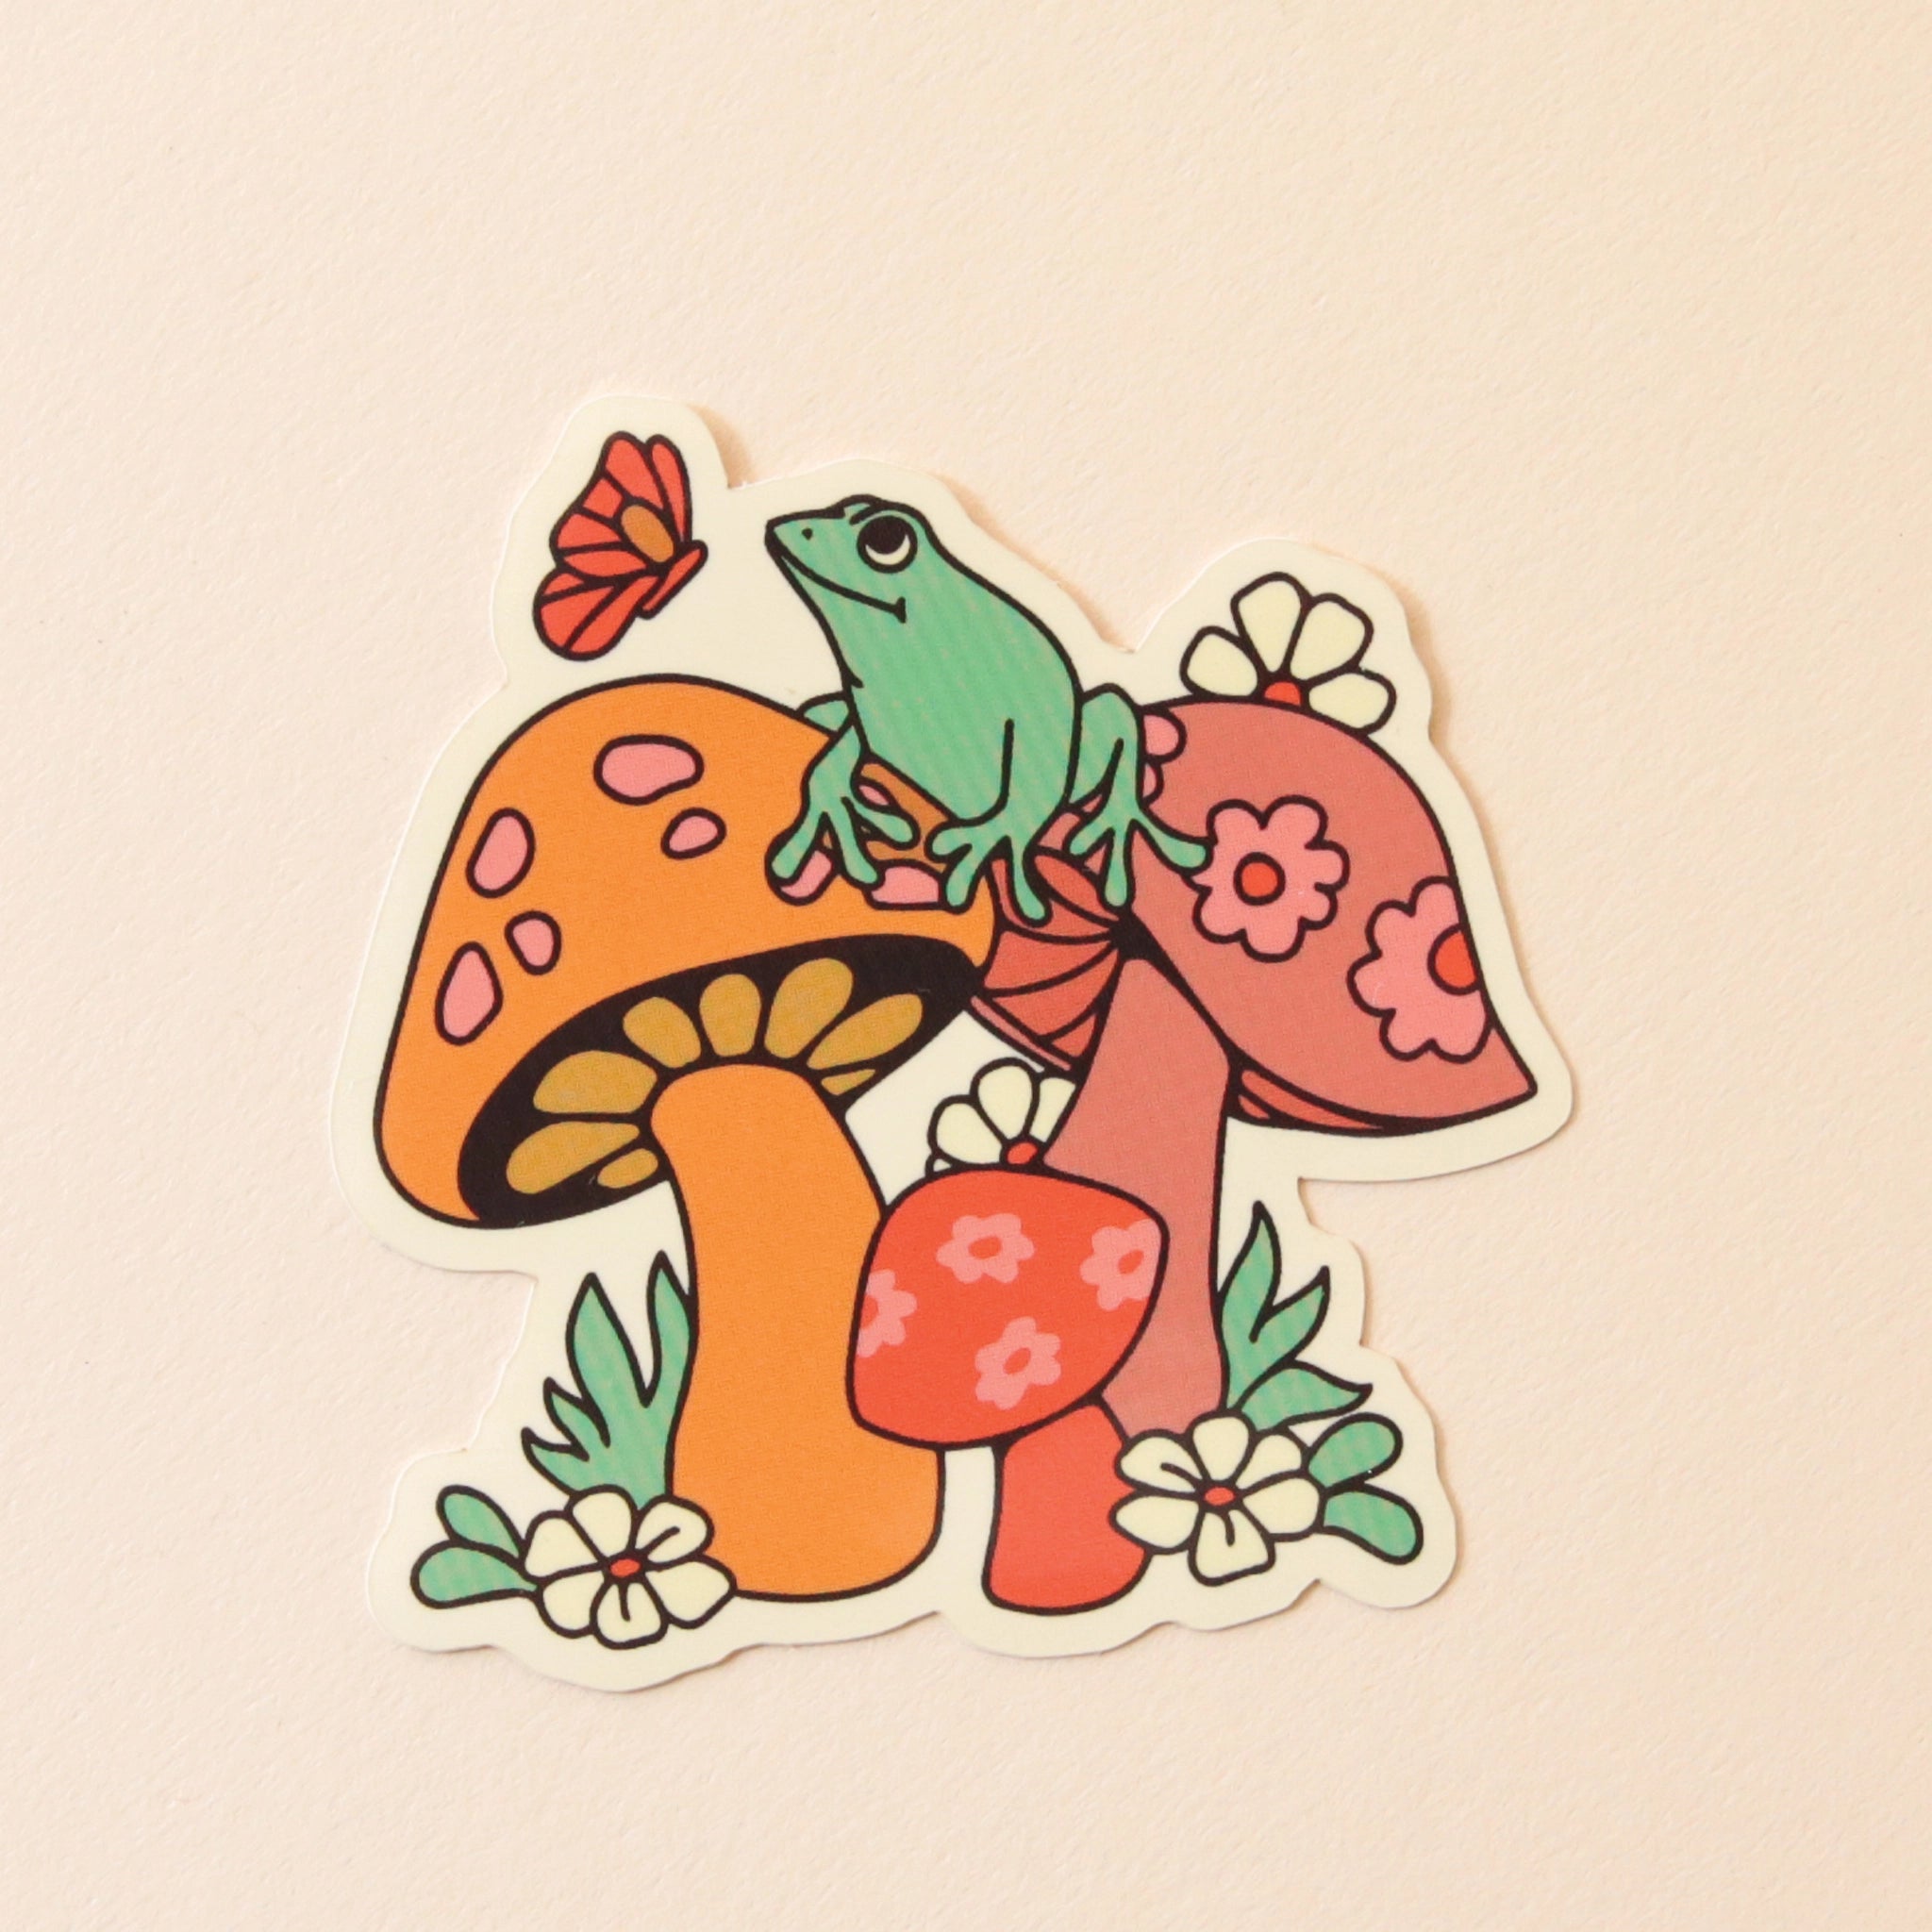 On a cream background is a sticker with an illustration of multi colored mushrooms with a green frog siting on top of it. 